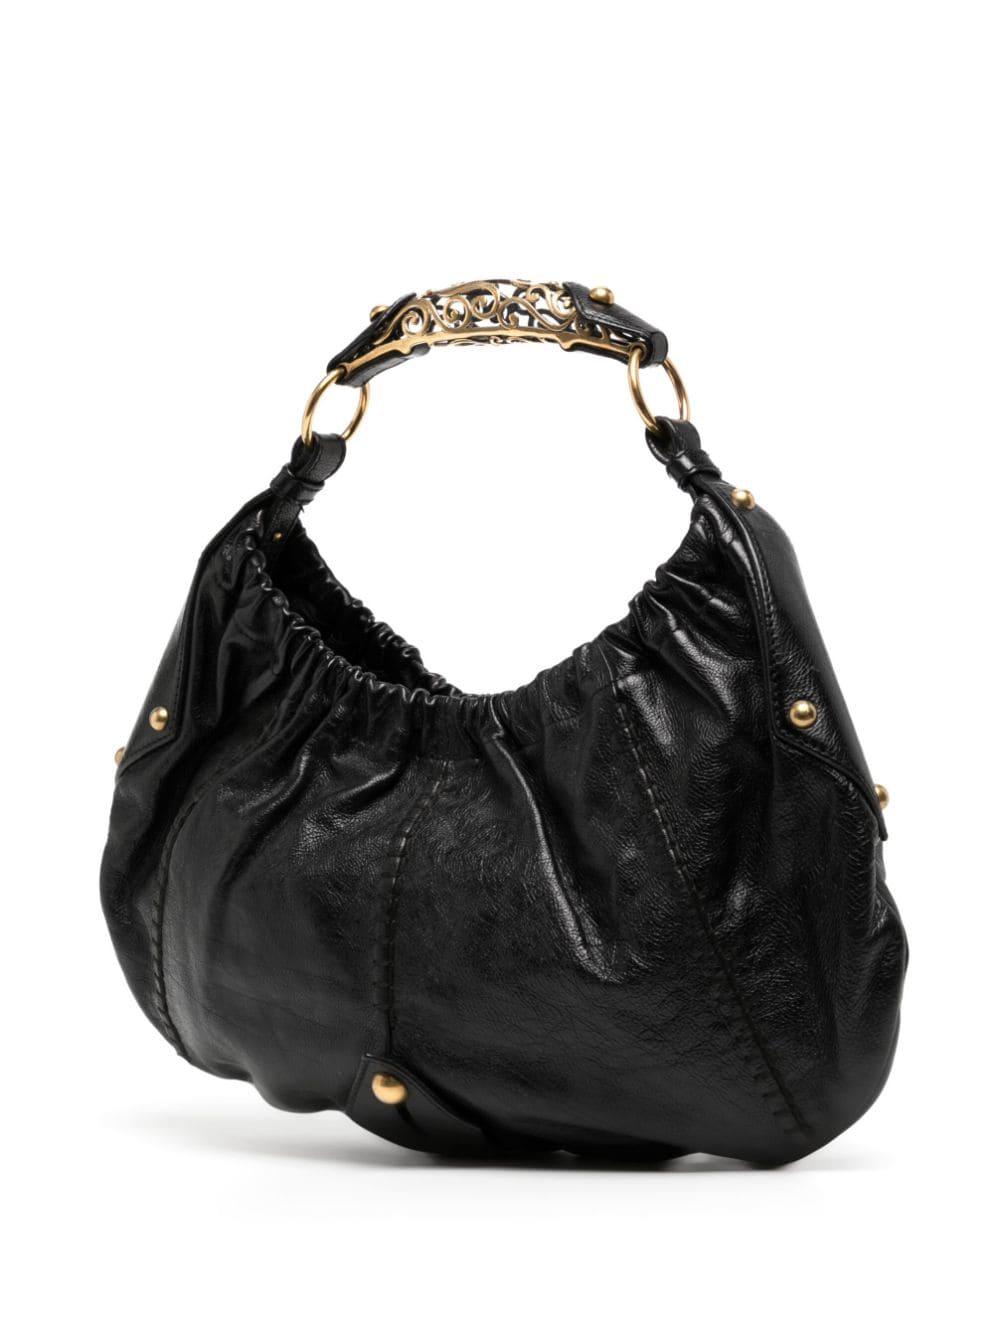 * Black calf leather
* Ruched detailing
* Gold-tone stud detailing & hardware
* Iconic Mombasa gold embellished top handle
* Magnetic fastening closure
* Satin interior
* Removable pouch
* Very good condition: minor signs of wear & scratches on